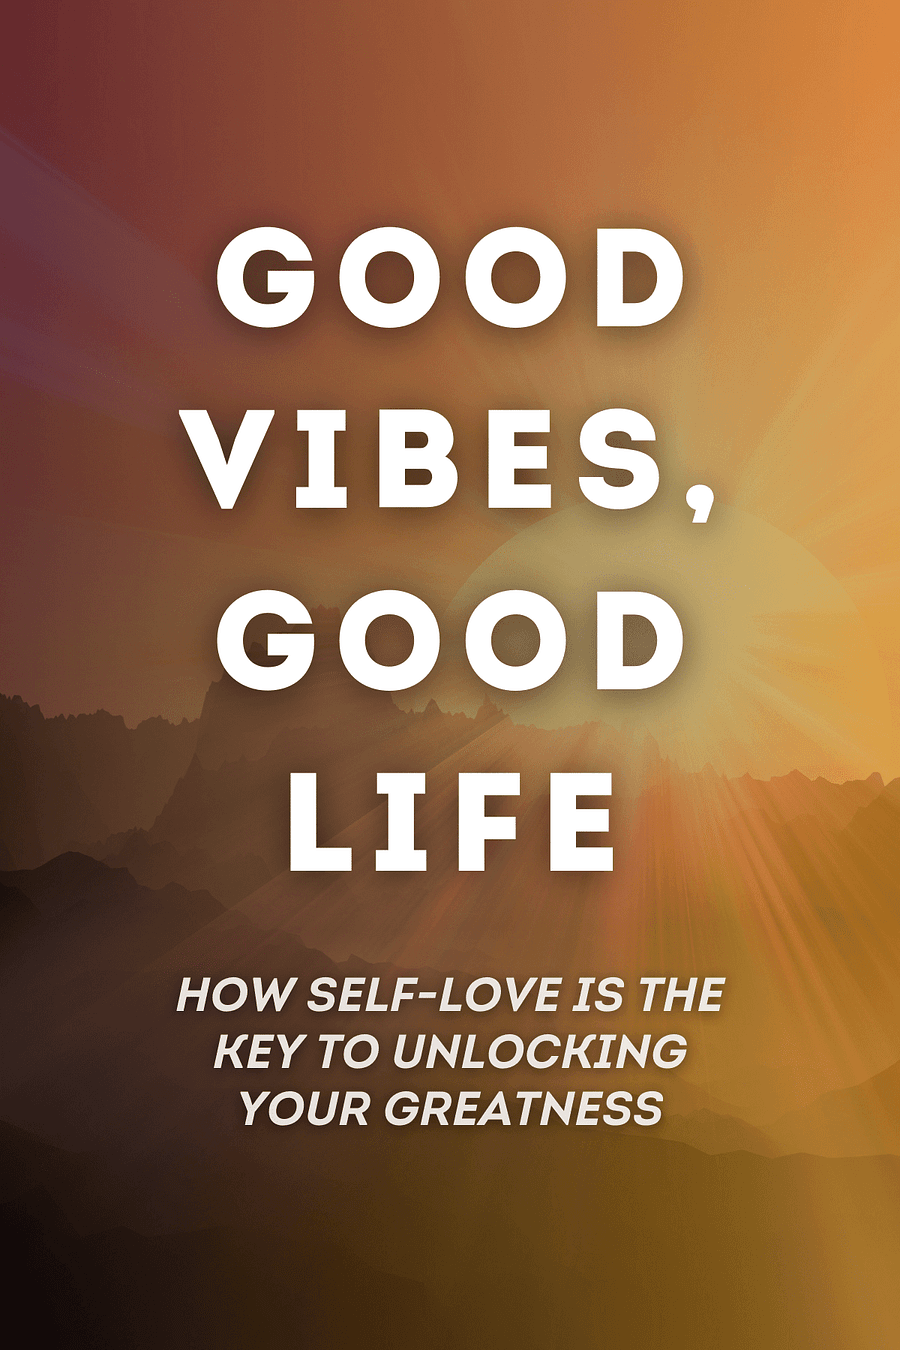 Good Vibes, Good Life by Vex King - Book Summary